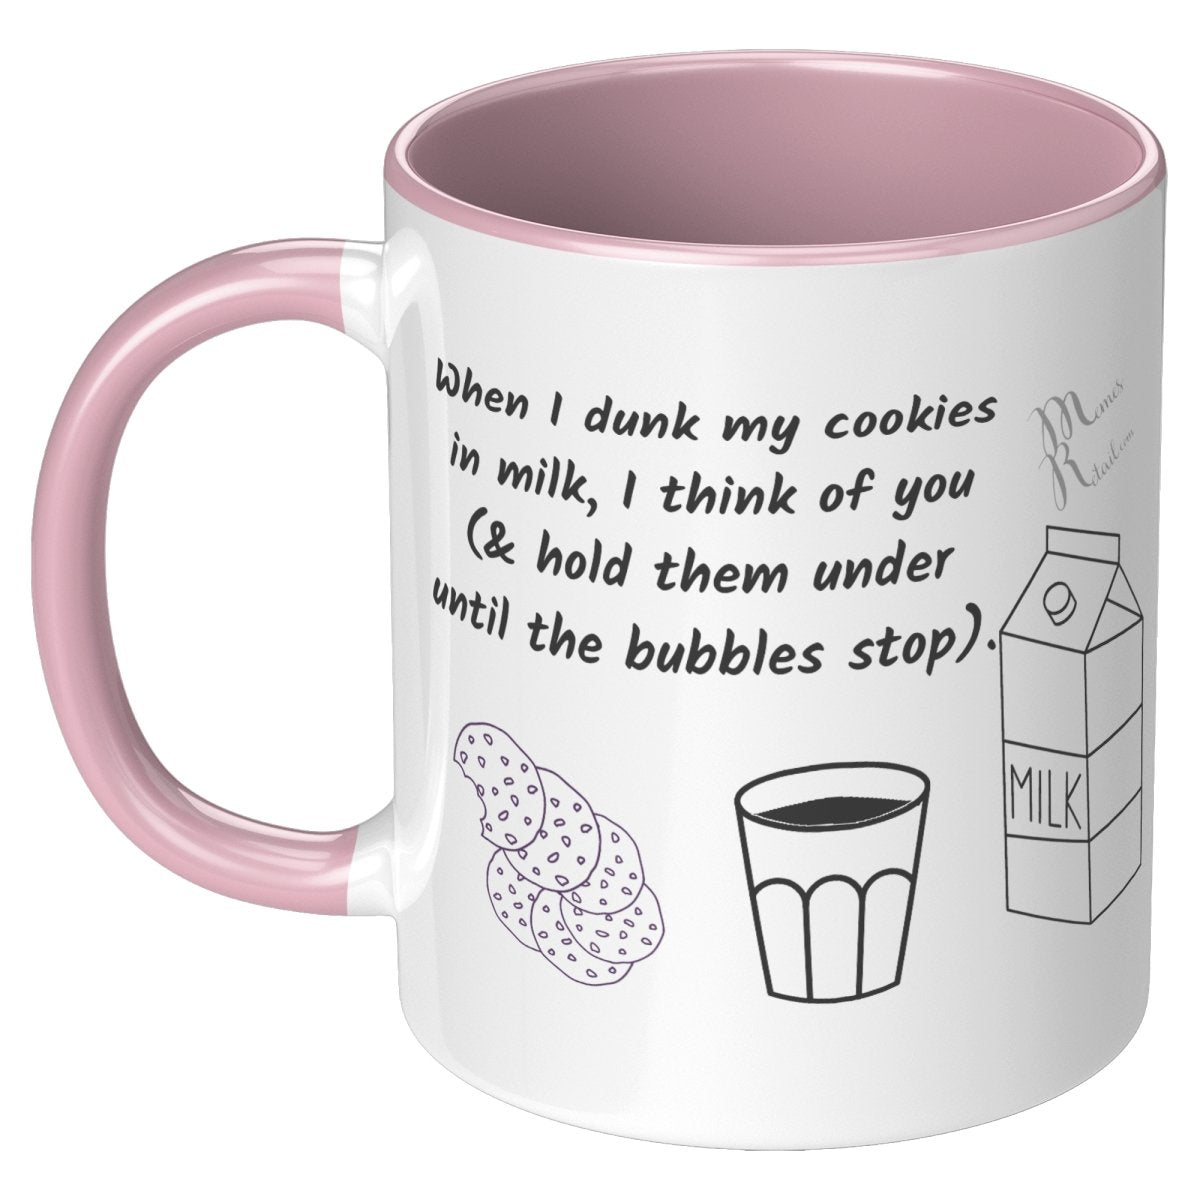 When I dunk My Cookies in Milk, I think of You - 11oz/15oz Mugs, 11oz / Pink Accent - MemesRetail.com